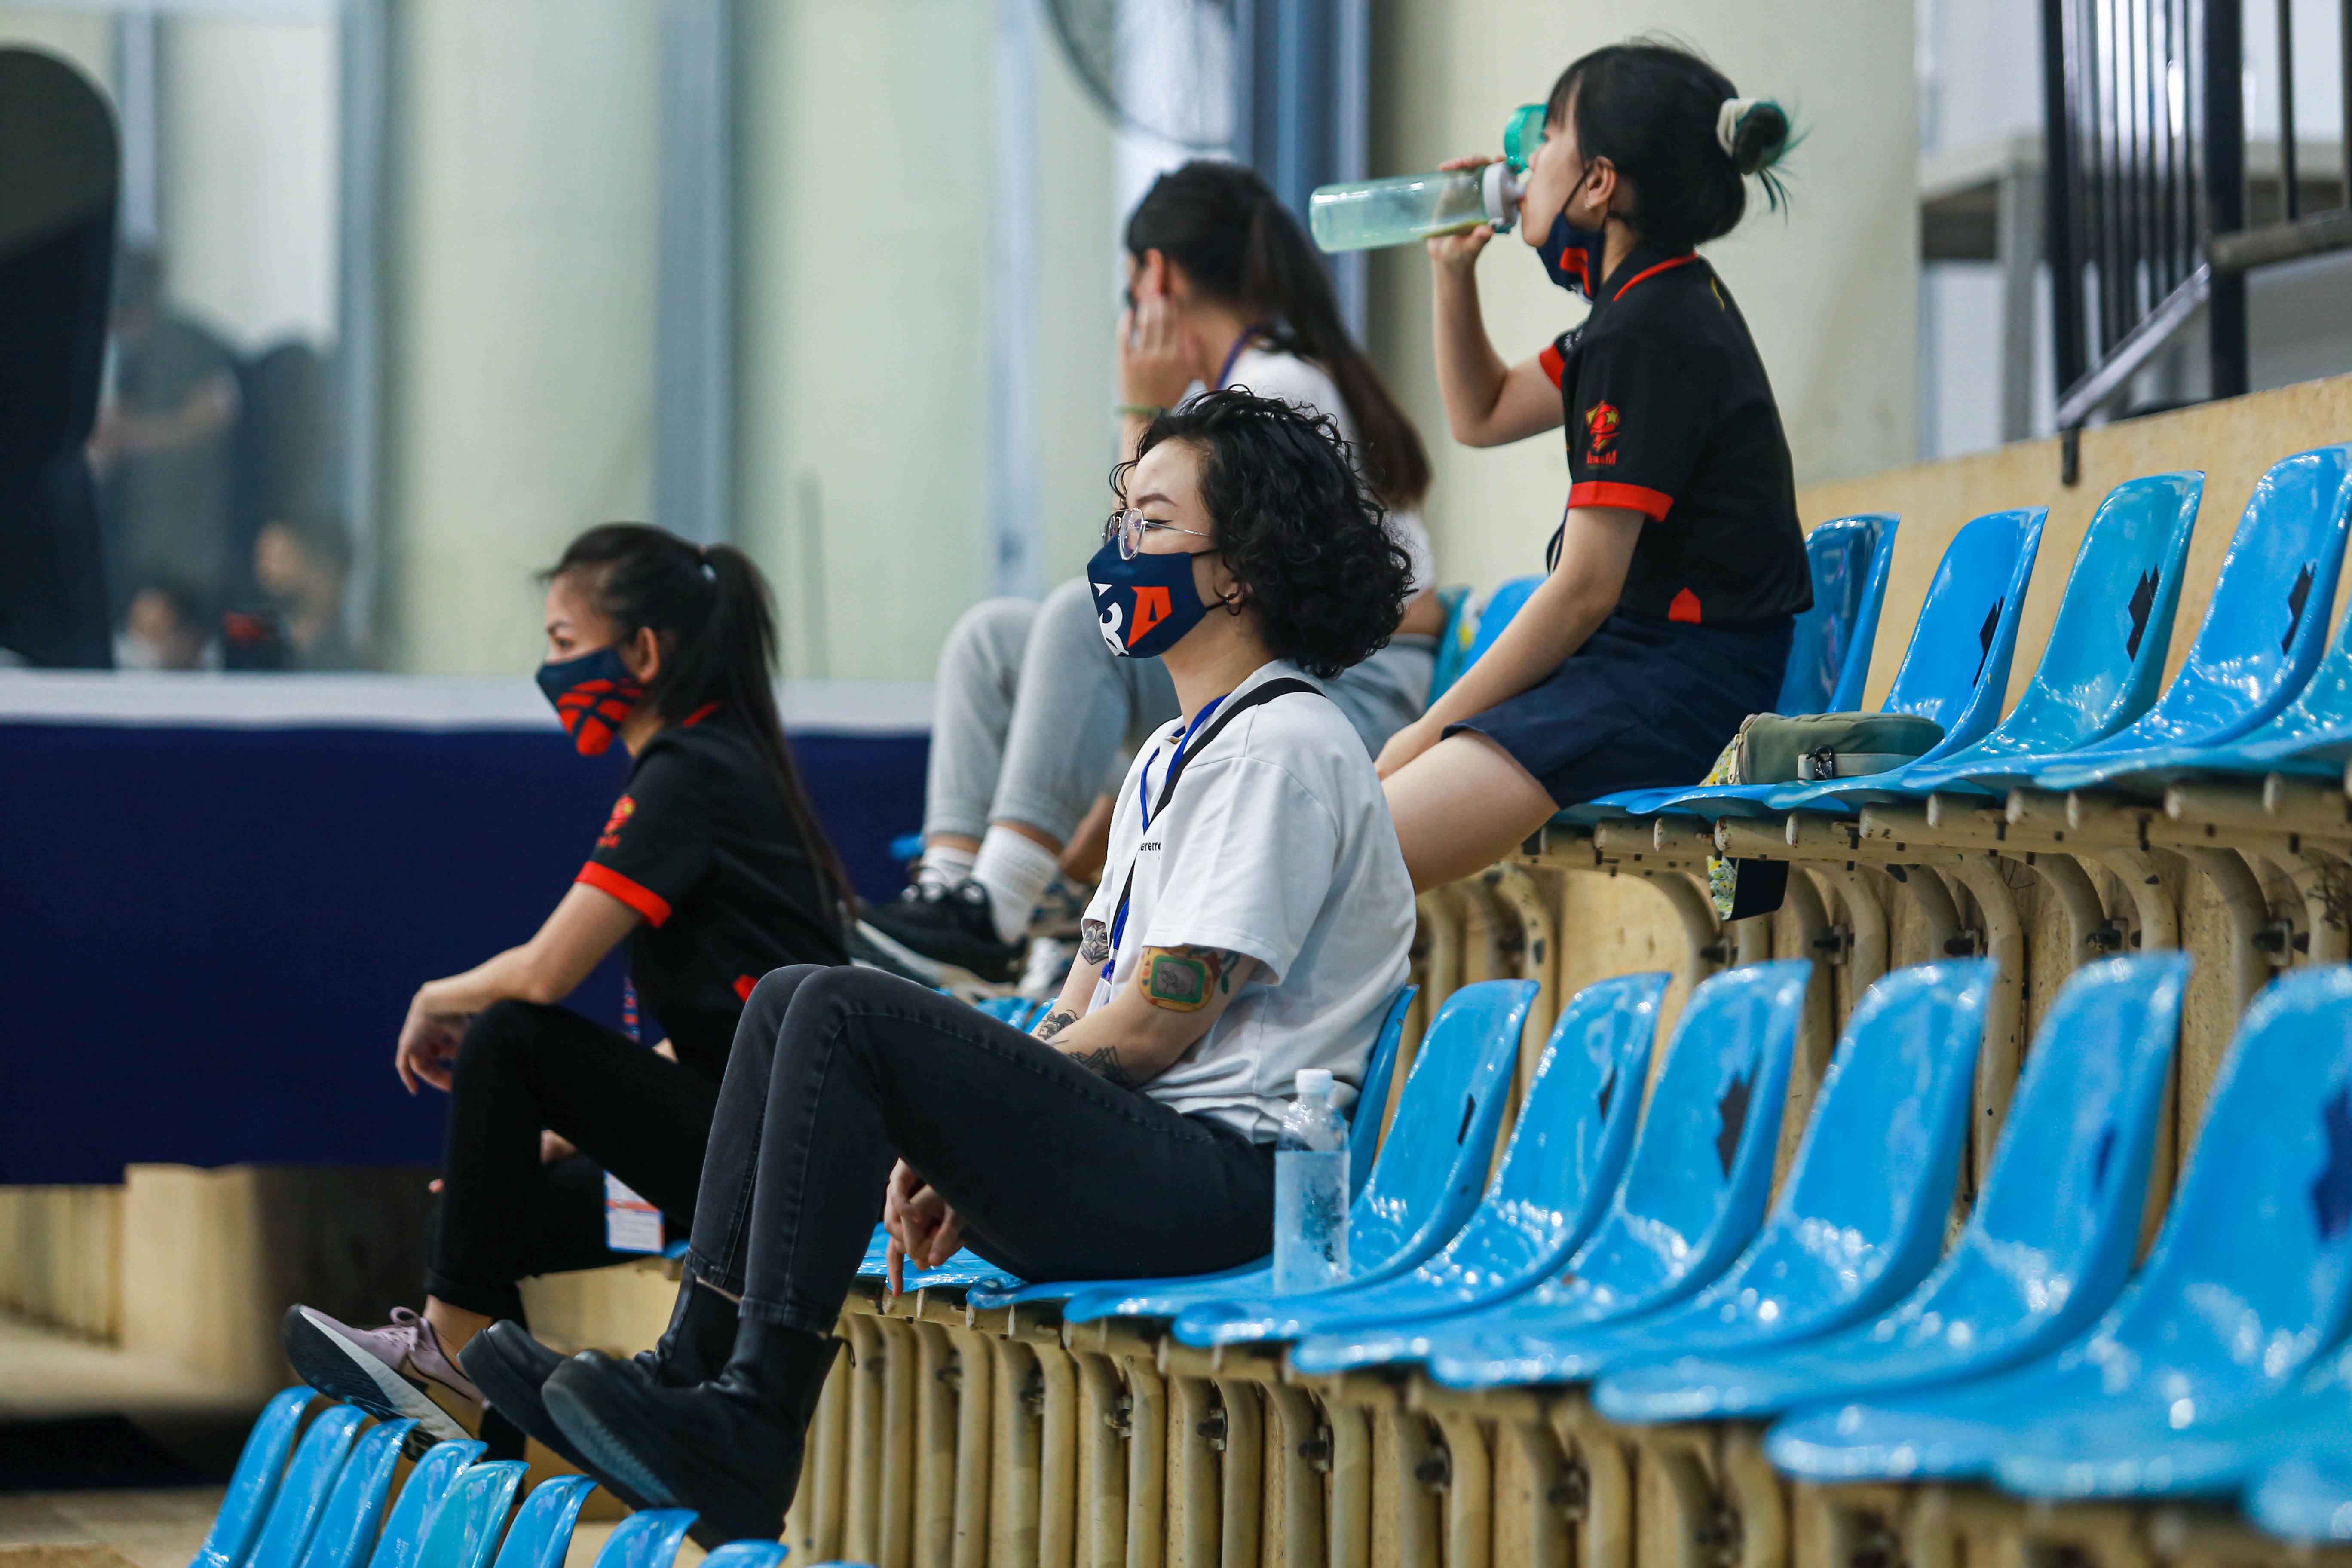 Huyen Nguyen – Tam Dinh’s girlfriend – worries as she sits in the audience. Photo: VBA